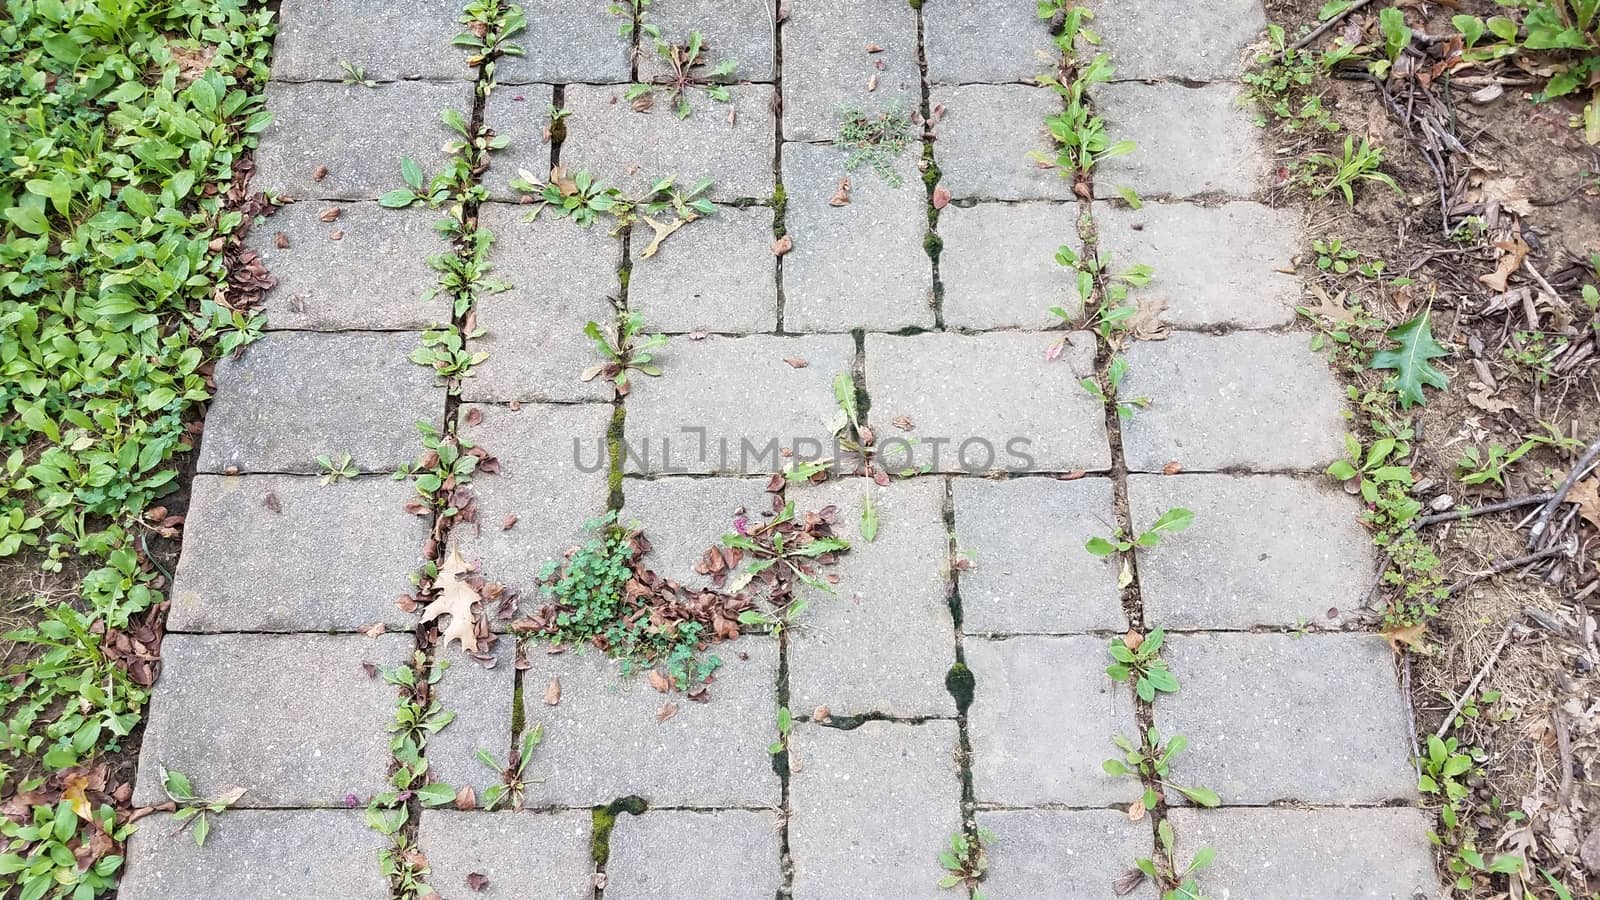 stone tile path or trail with weeds in the cracks by stockphotofan1